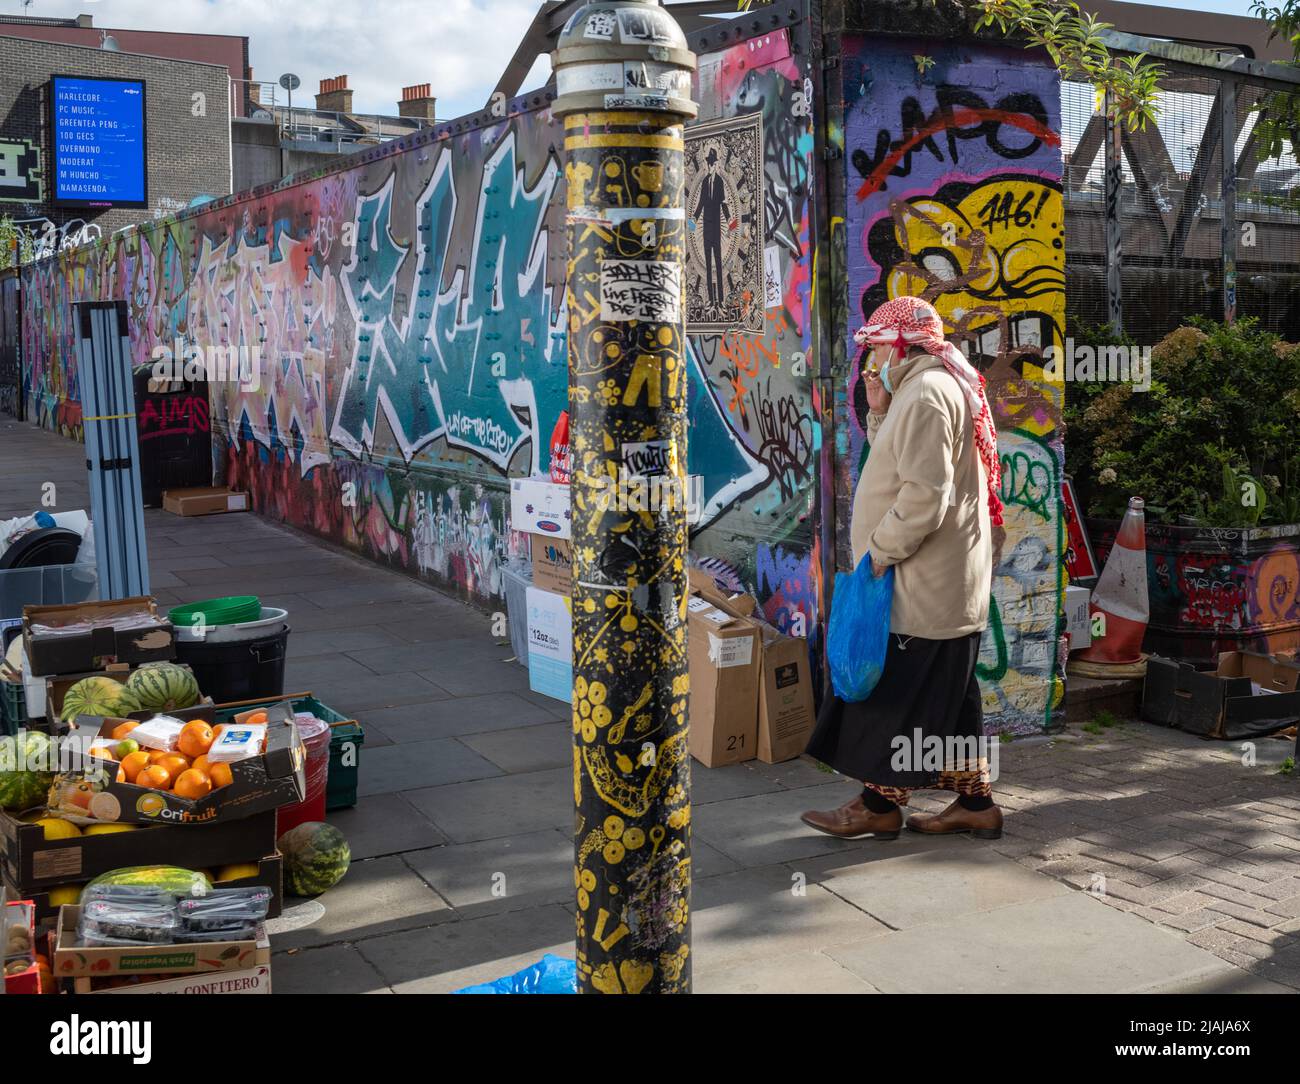 A man dressed in a middle eastern headscarf walks past a fruit stall at Brick Lane Market, London, England, UK Stock Photo